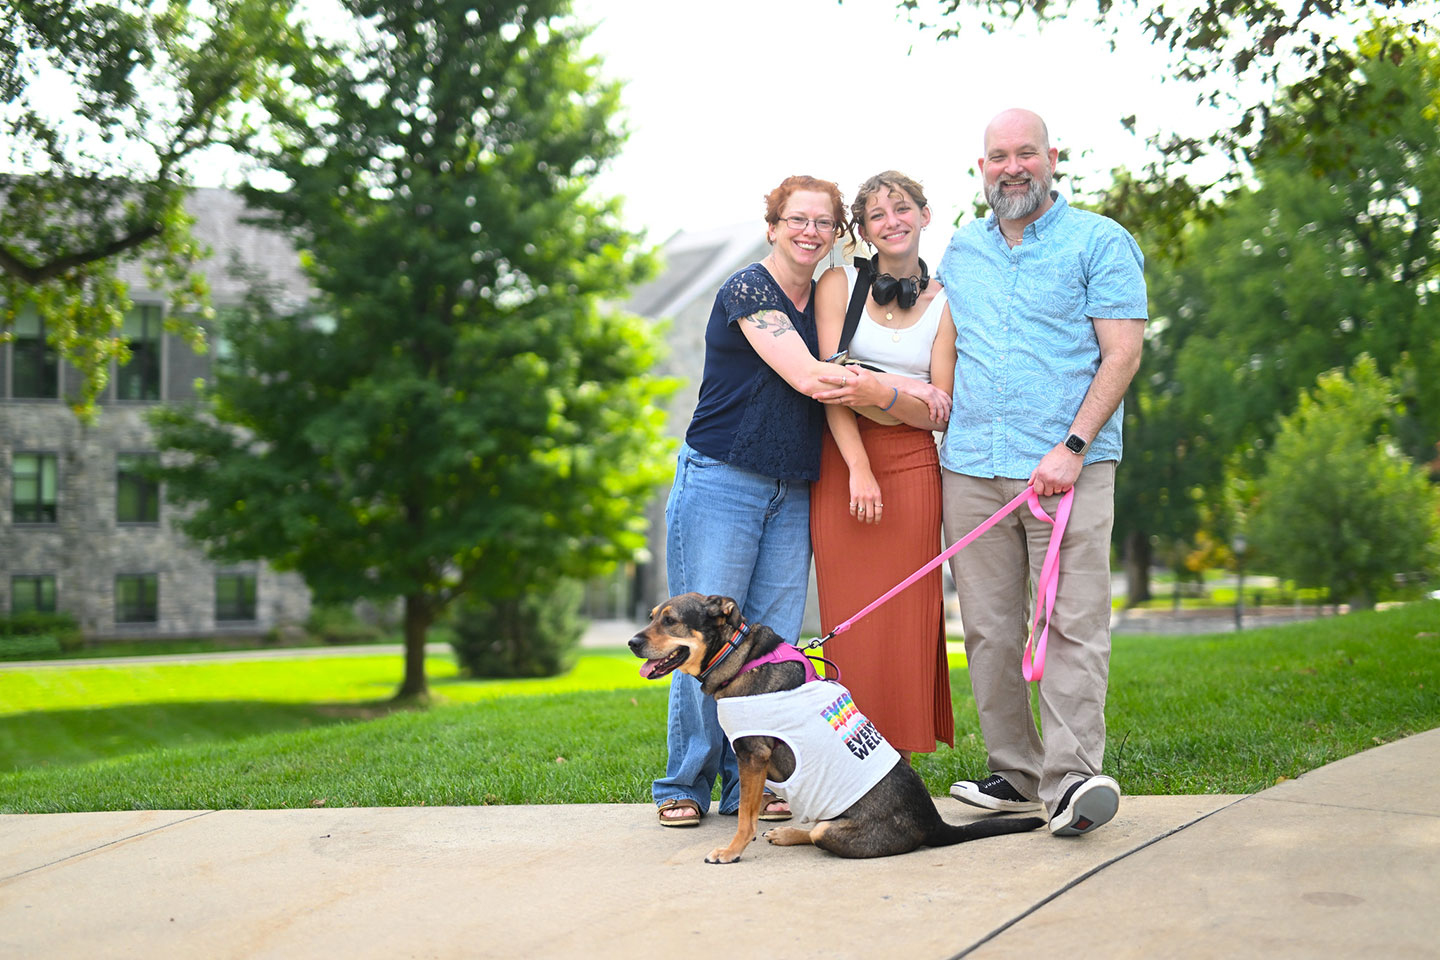 Mom and dad are hugging their daughter while dad is holding the leash for their dog. The dog is wearing a t-shirt. 